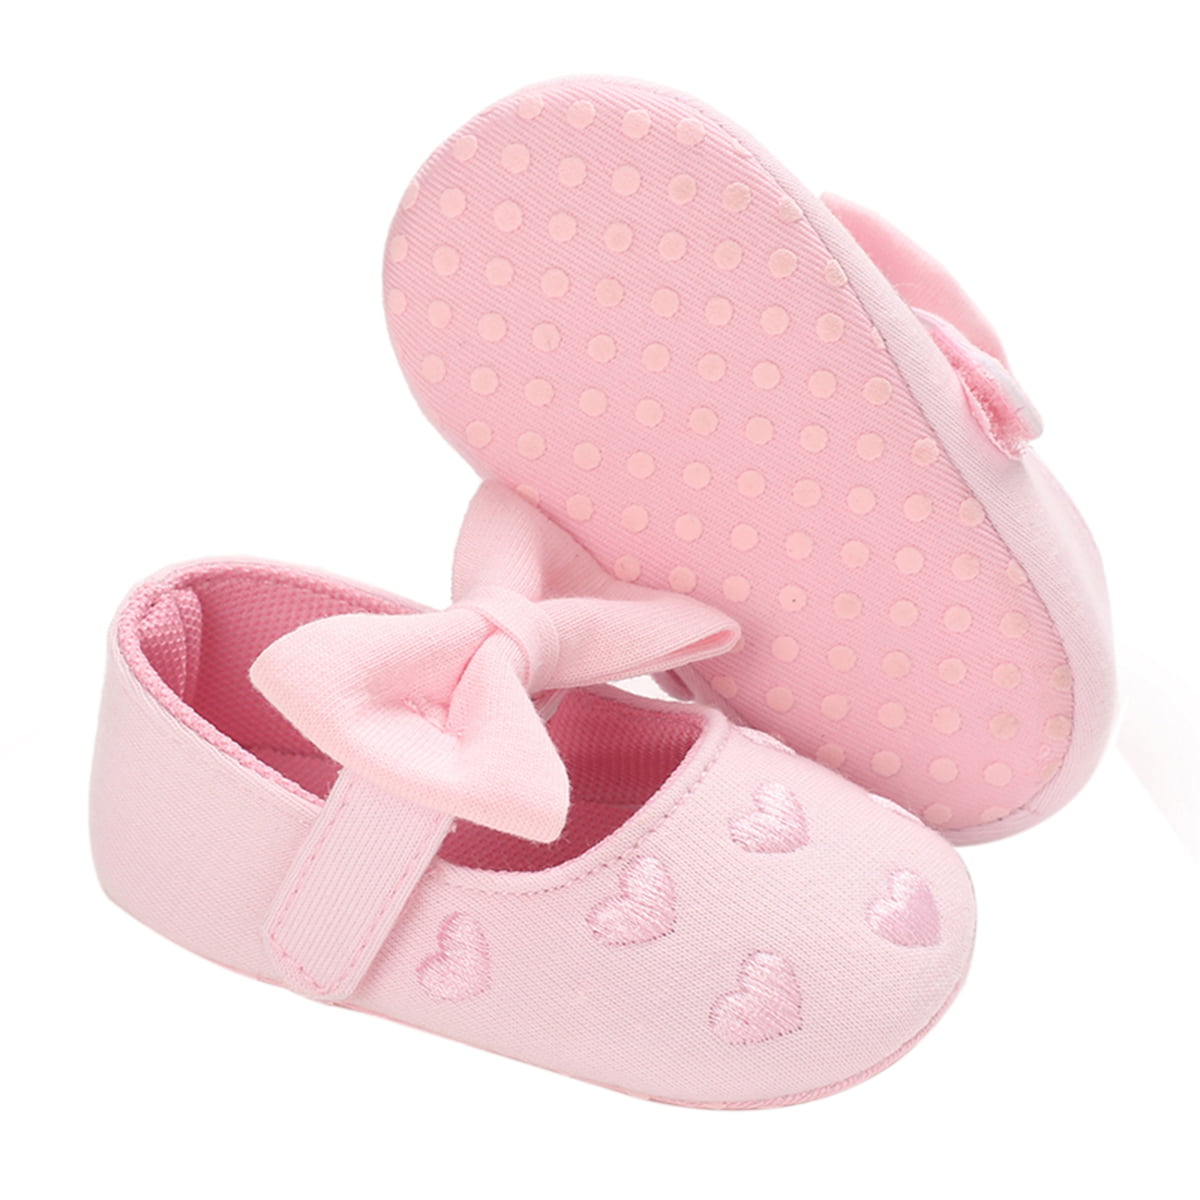 Baby Girls Newborn Infant Bow Casual Toddler Anti-Slip Flat Crib Shoes Trainer 